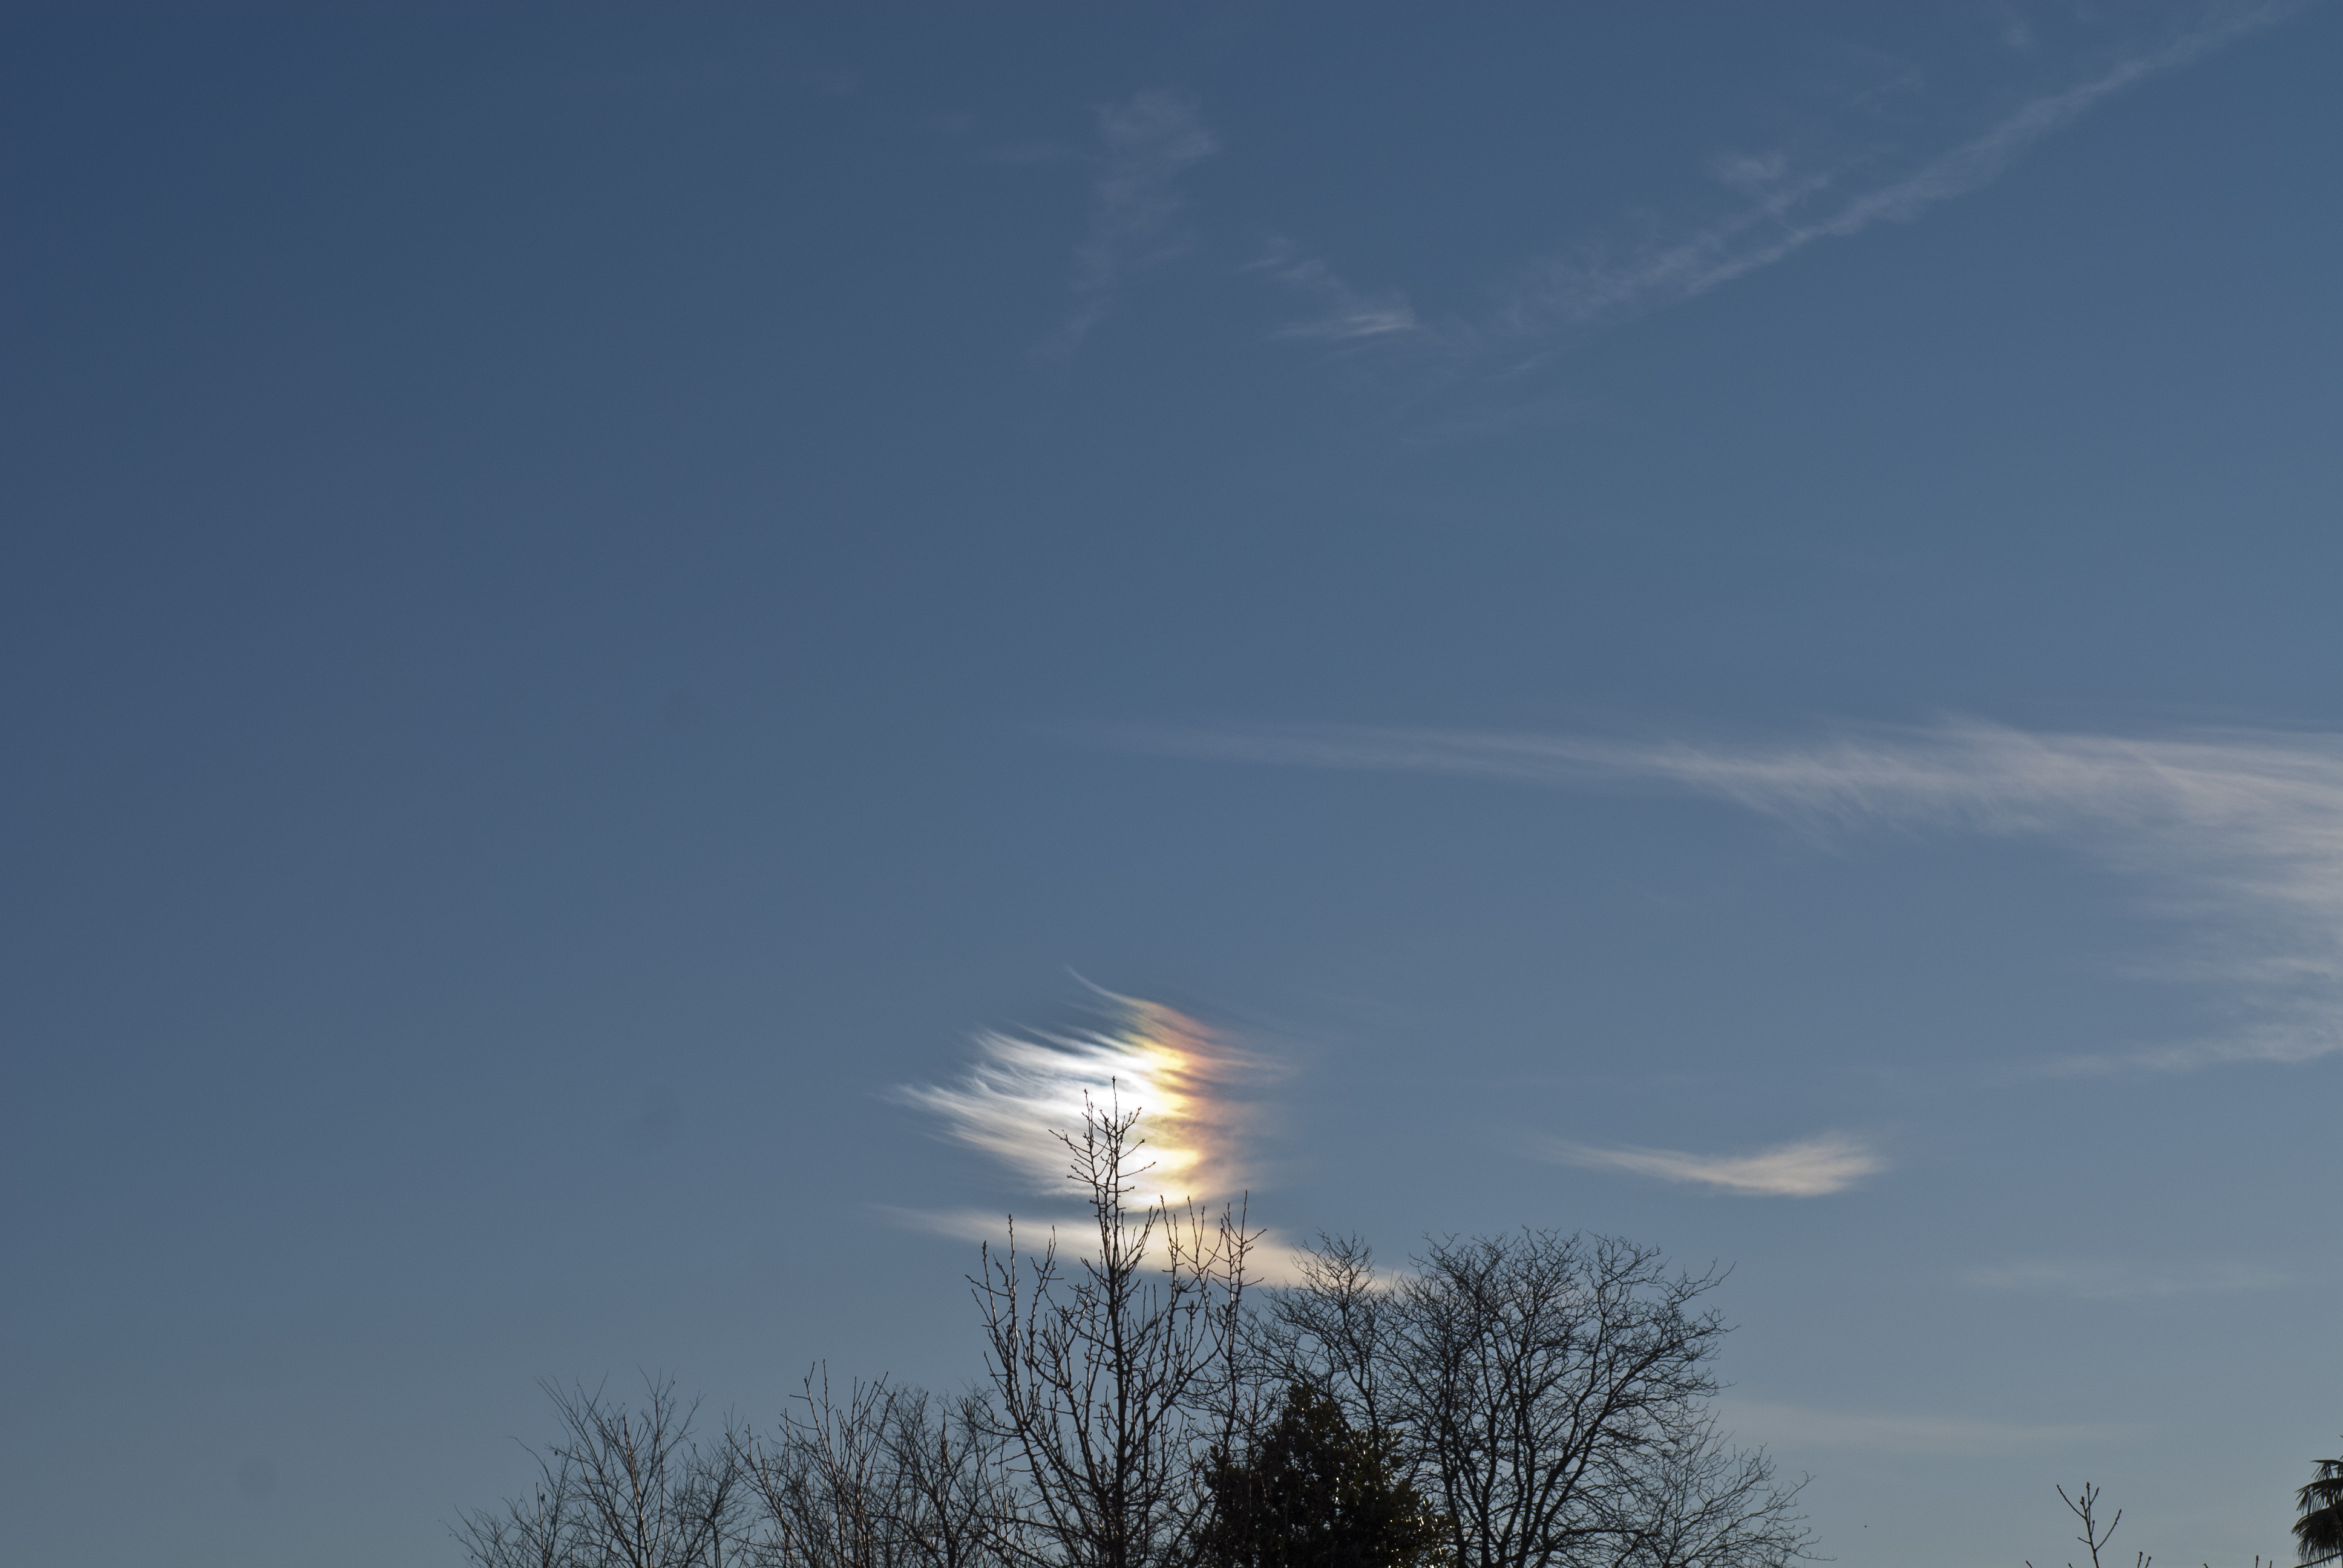 Sundog photographed by Federico Benvenuto: 1429 KB; click on the image to enlarge